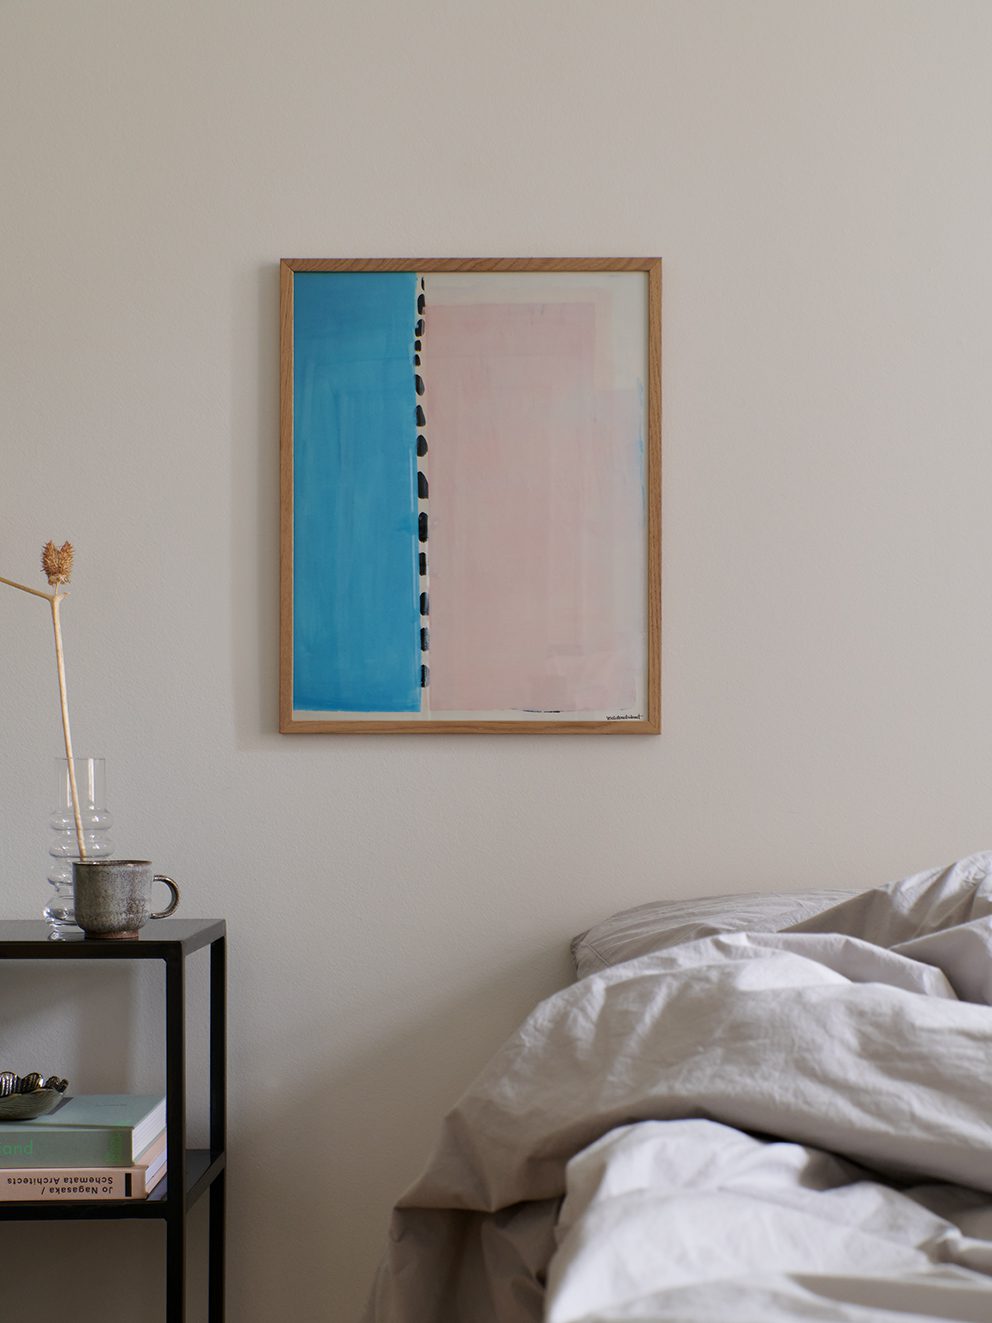 Can I Frame a Stretched Canvas?